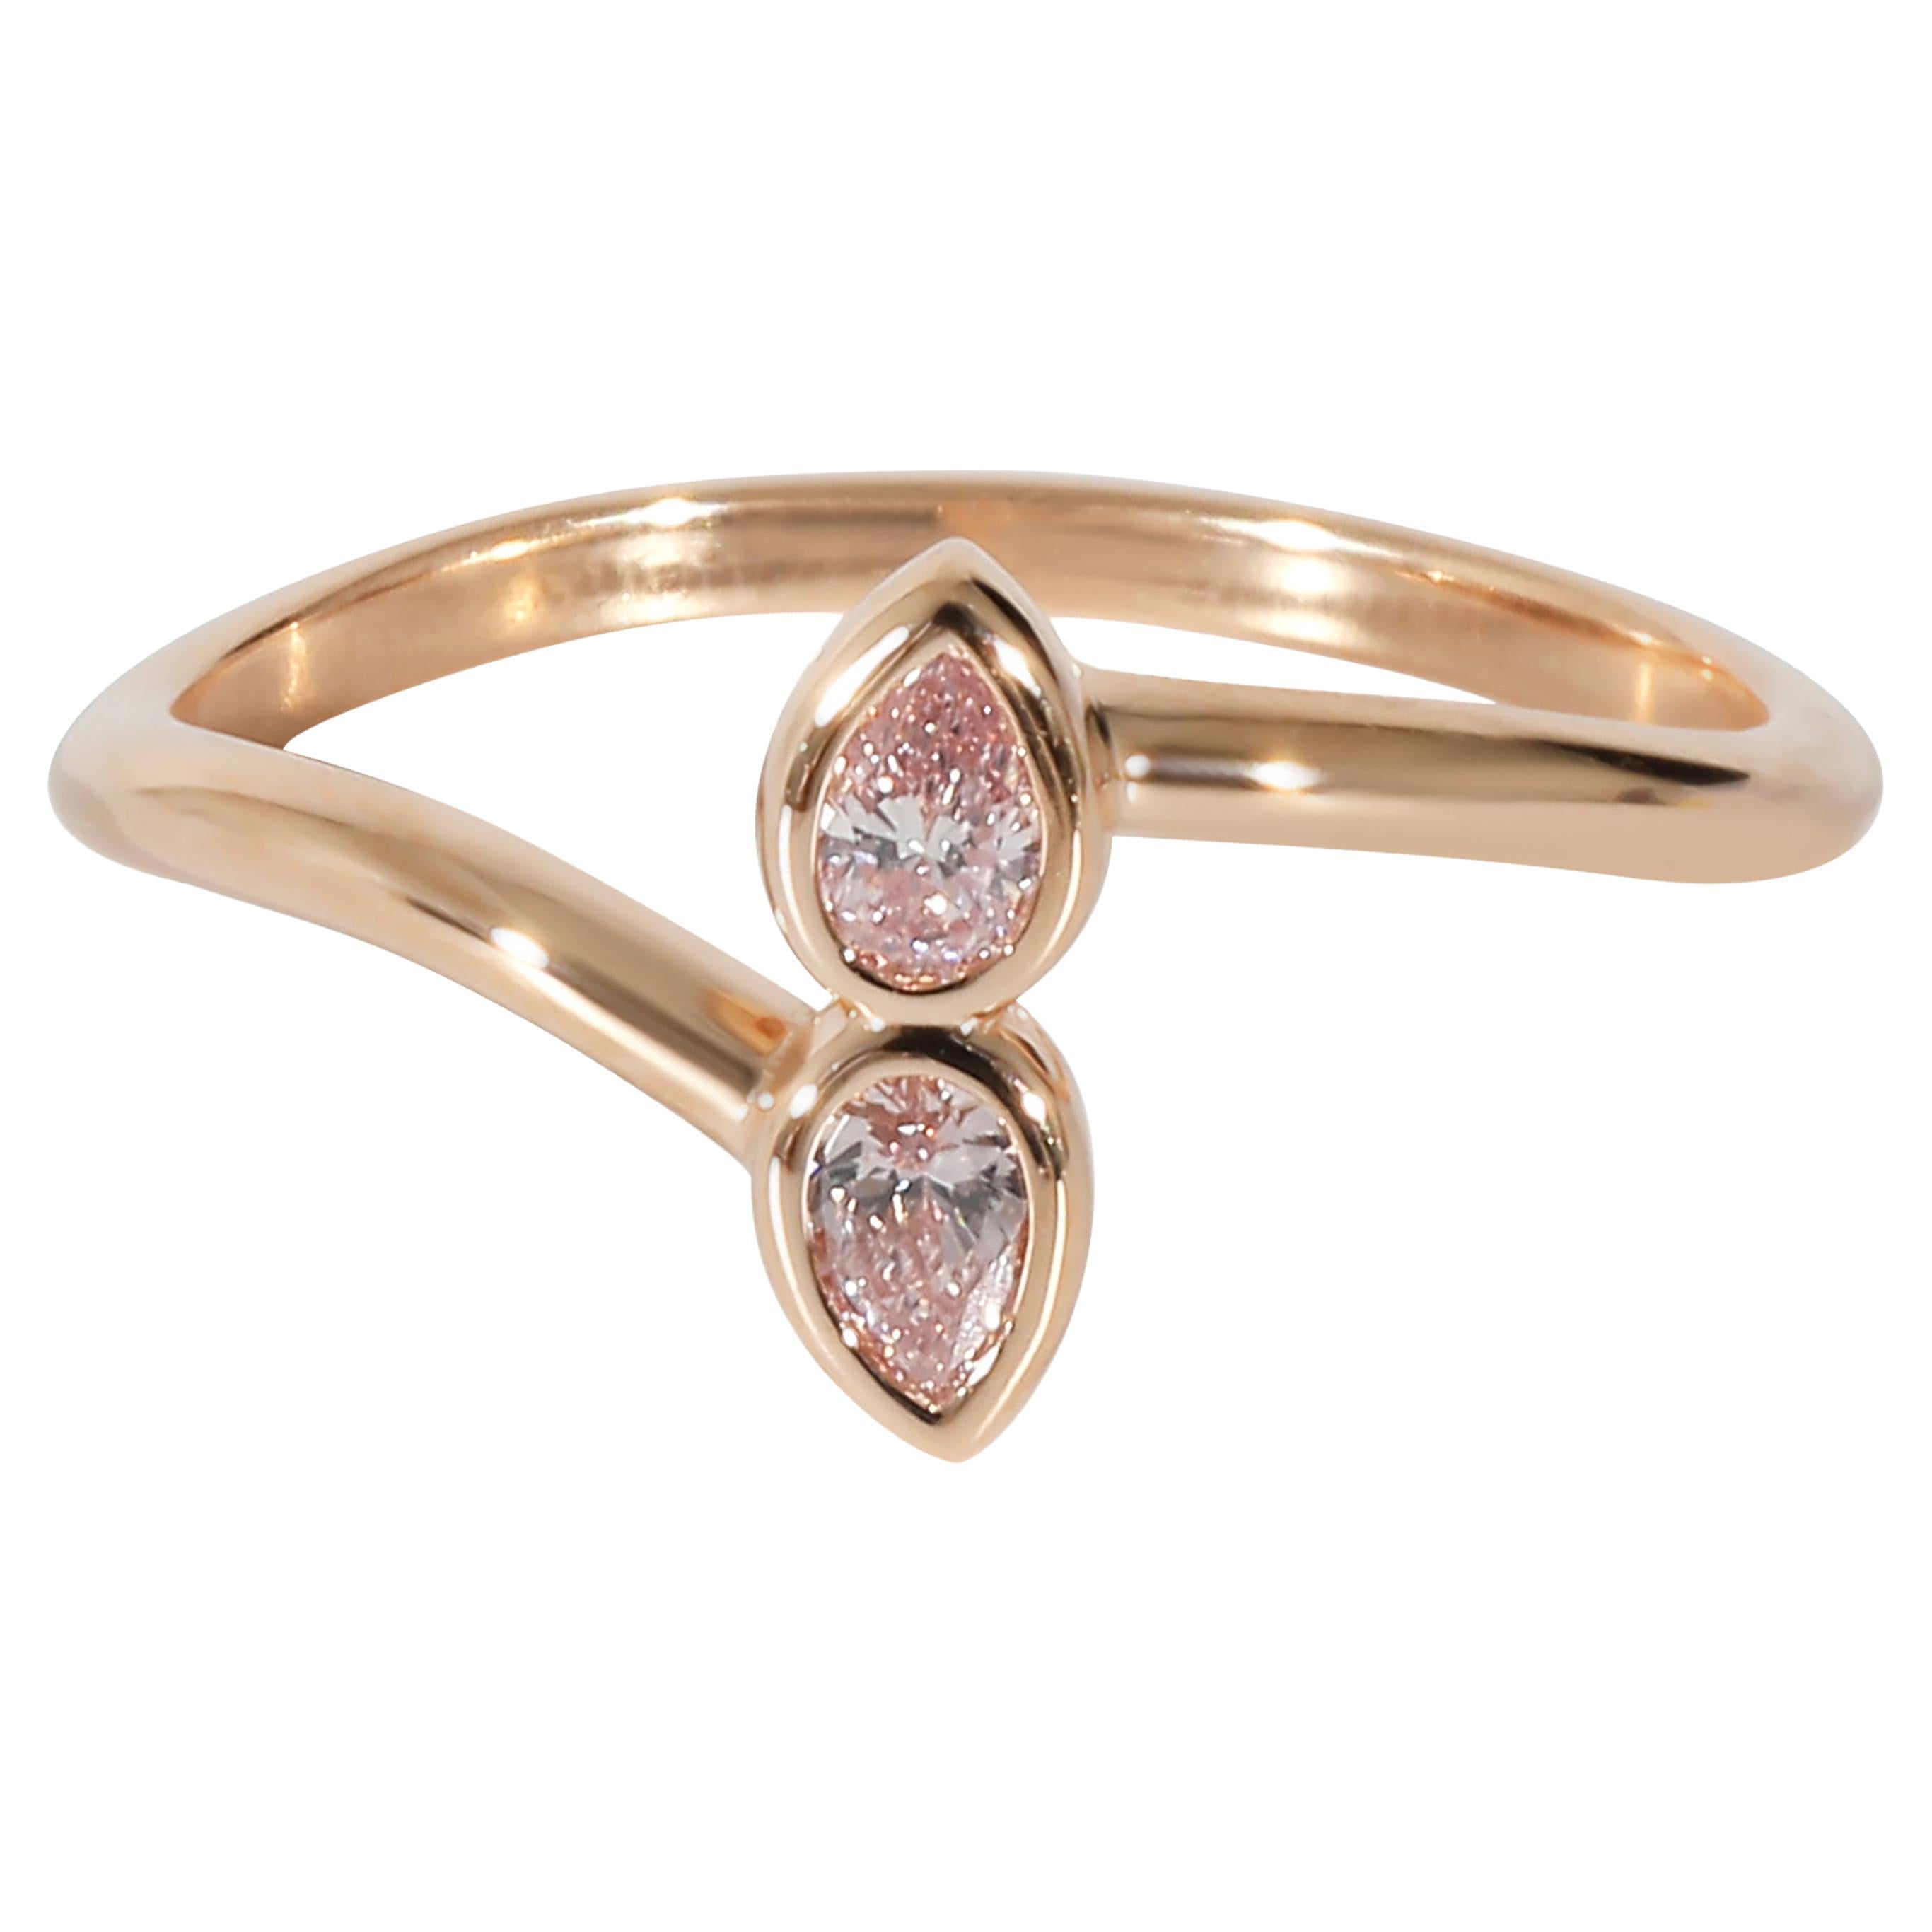 Pink Pear Shaped Diamonds Mirror Ring in 18K Rose Gold, 0.16 Ctw For Sale